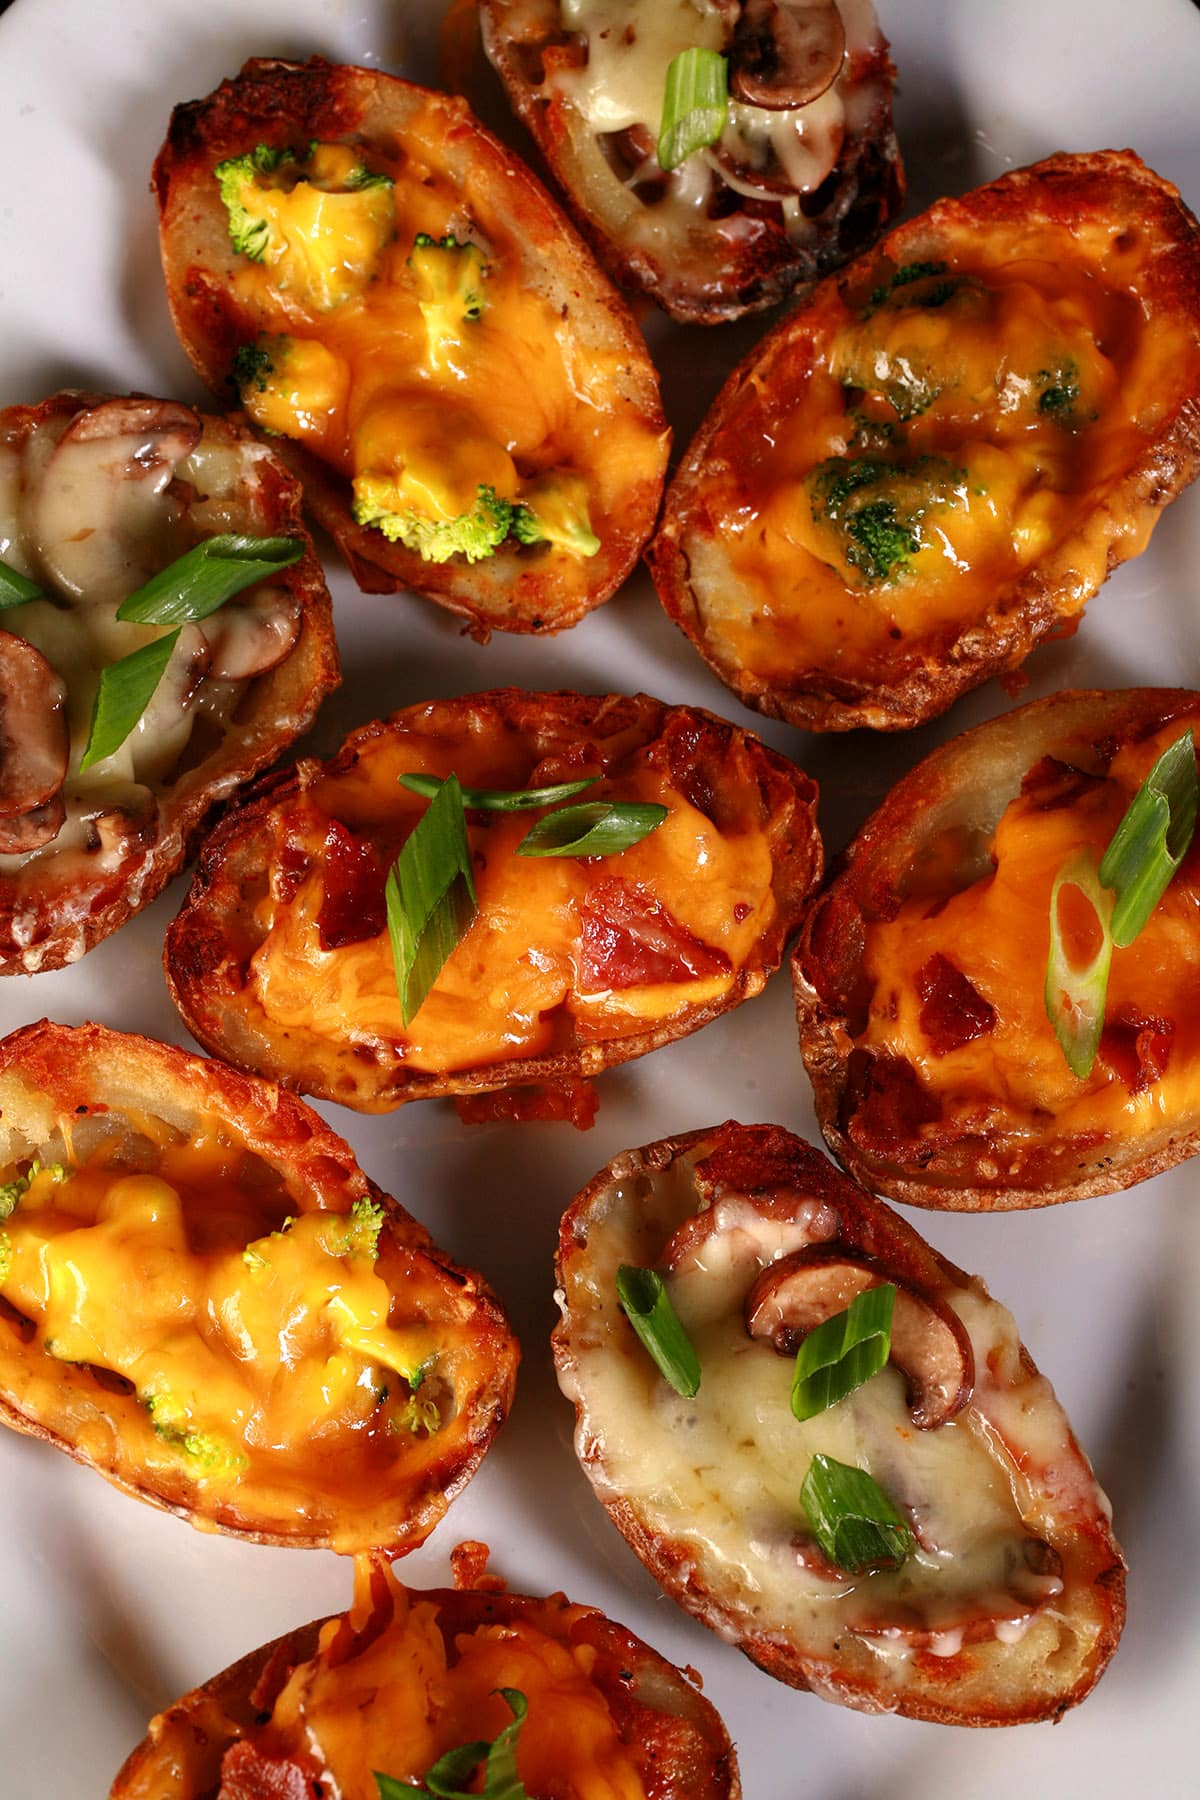 A plate of loaded bacon roasted potato skins, with various toppings.